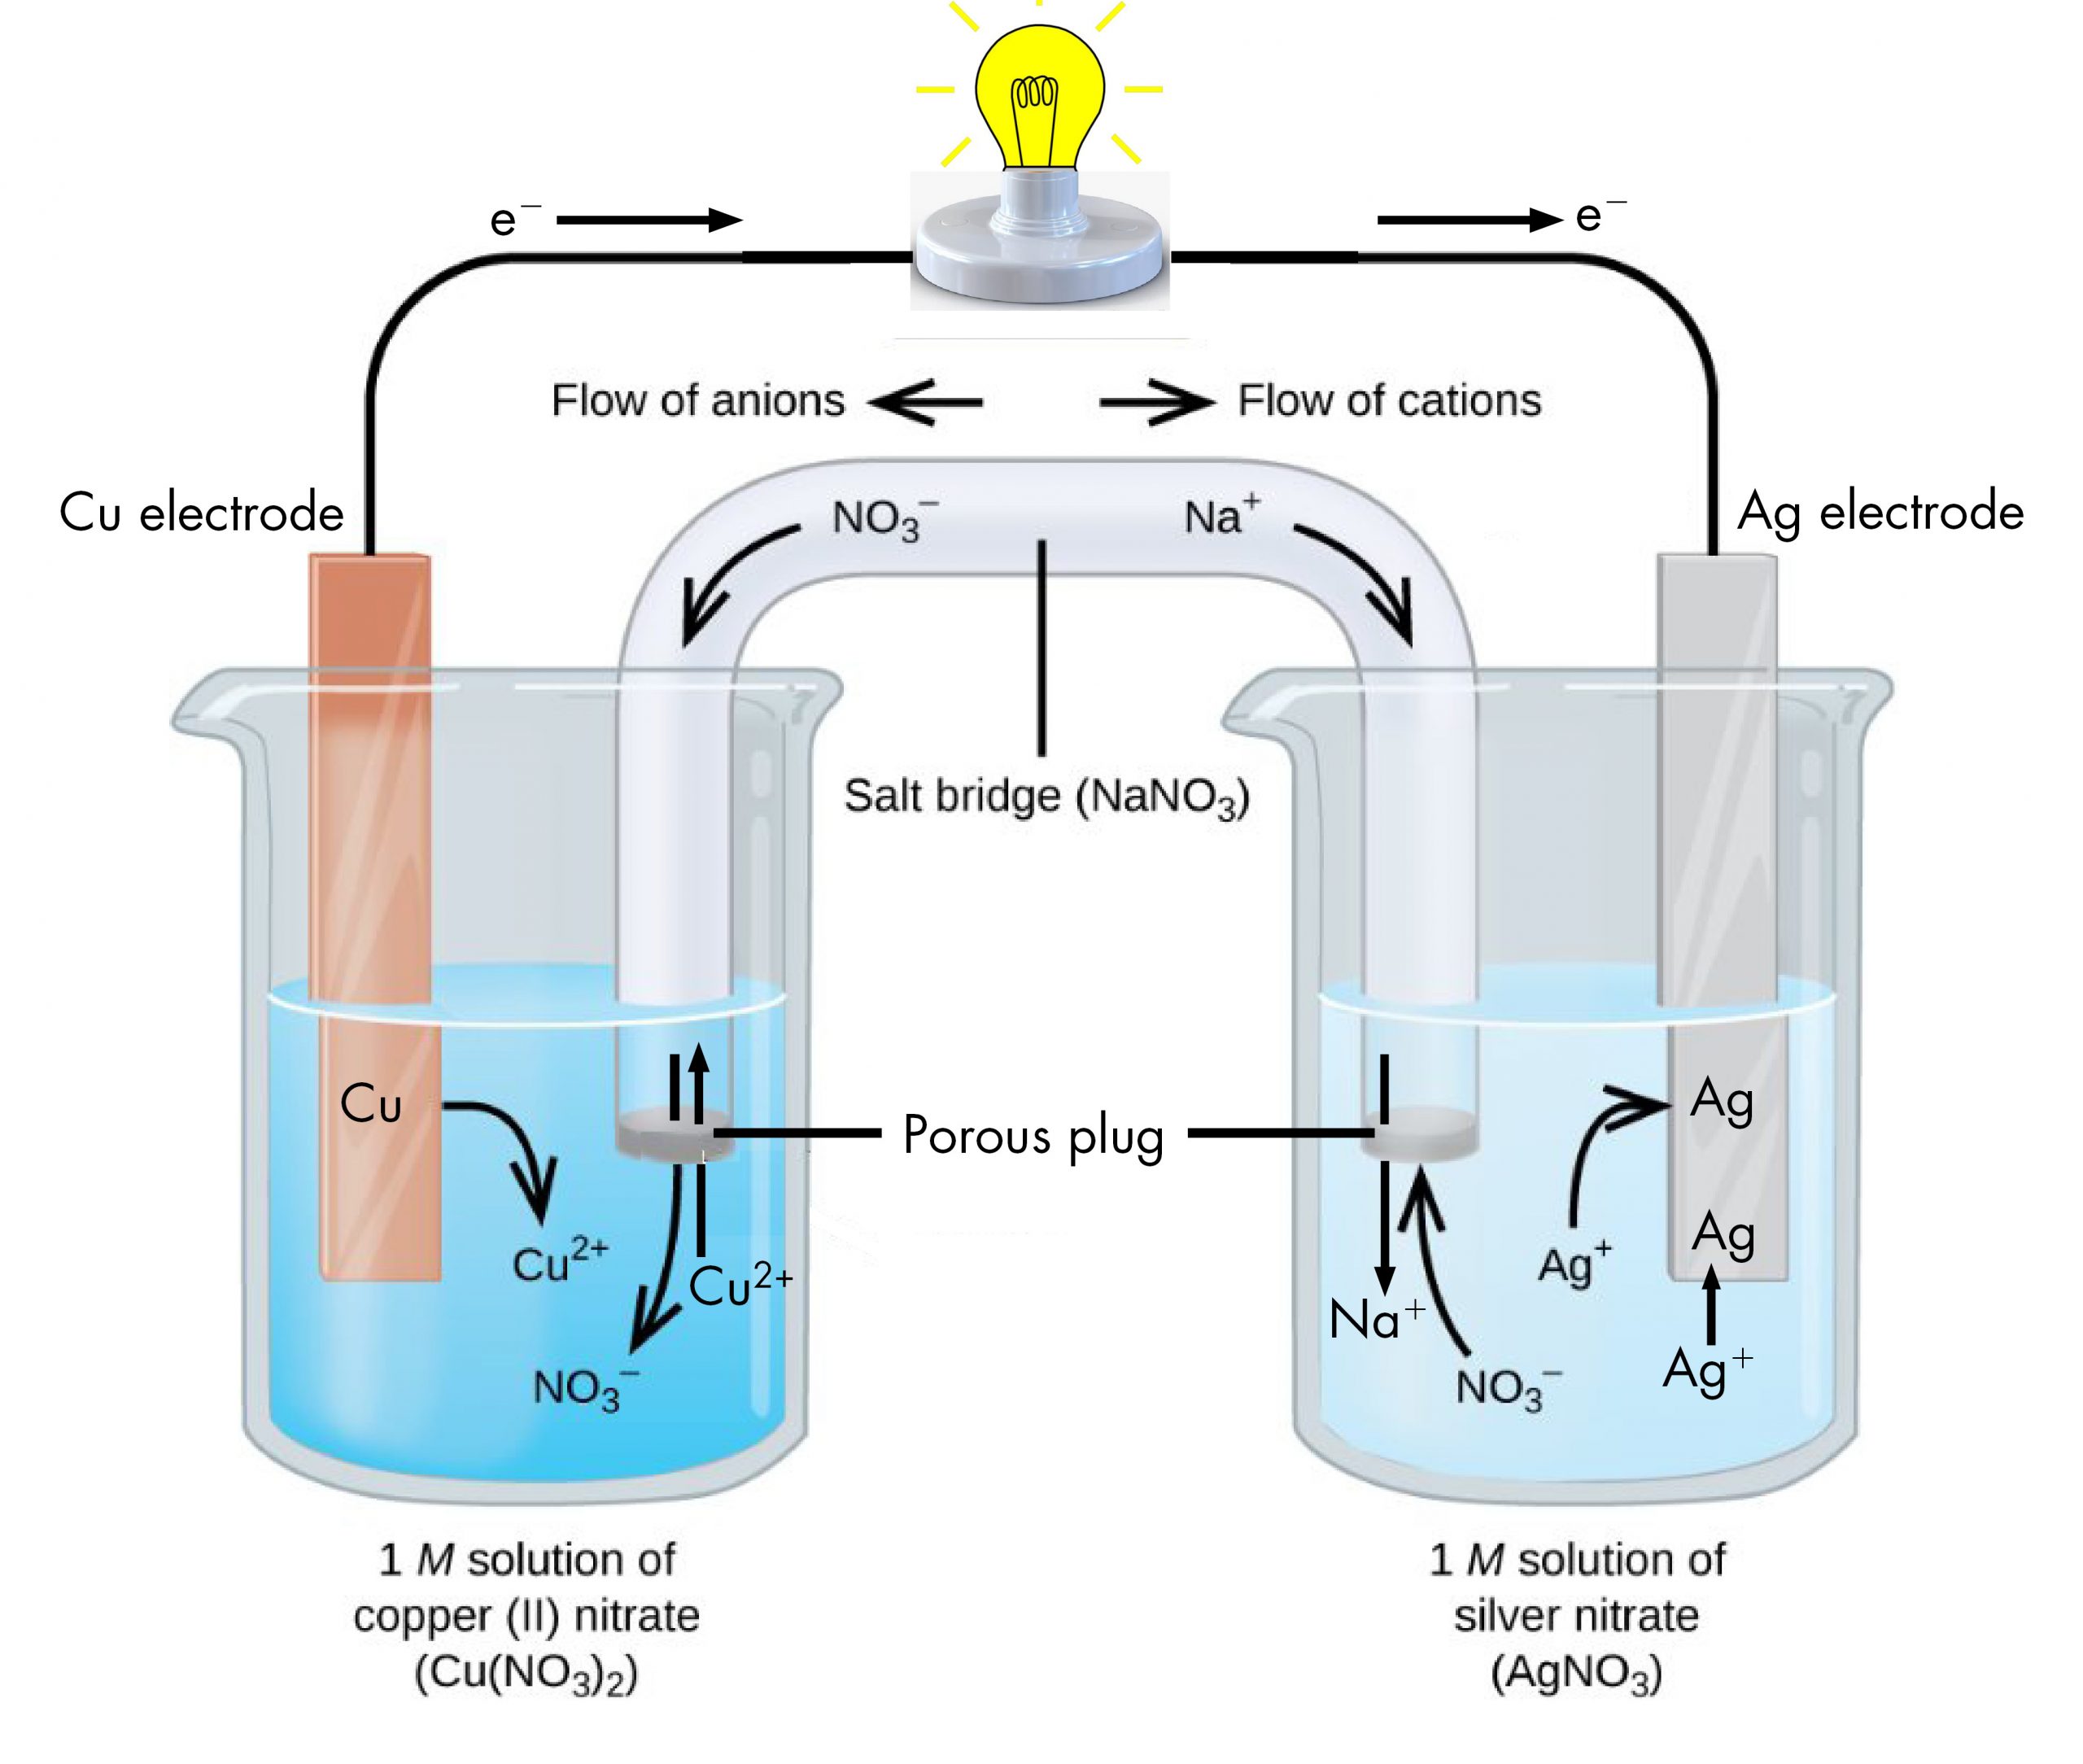 This figure contains a diagram of an electrochemical cell. Two beakers are shown. The beaker on the left contains a solution labeled "1 M solution of copper (II) nitrate.” The beaker on the right contains a solution labeled below as “1 M solution of silver nitrate.” A glass tube in the shape of an inverted U connects the two beakers at the center of the diagram. The ends of the tubes are beneath the surface of the solutions in the beakers and a small grey plug is present at each end of the tube. The plug in each beaker is labeled “Porous plug.” At the center of the diagram, the tube is labeled “Salt bridge." Each beaker shows a metal strip partially submerged in the liquid. The beaker on the left has a strip labeled “Copper electrode” at the top. The beaker on the right has a strip labeled “silver electrode” at the top. A wire extends from the top of each of these strips to a socket and lighted light bulb at the center top of the figure. An arrow points toward the light bulb from the left which is labeled “e superscript minus.” Similarly, an arrow points away from the voltmeter to the right which is also labeled “e superscript minus.” A curved arrow extends from the copper strip into the surrounding solution. The base of this arrow is labeled "copper" and the point of this arrow is labeled “copper superscript 2 plus.” A curved arrow extends from the salt bridge into the beaker on the left into the blue solution. The tip of this arrow is labeled “N O subscript 3 superscript negative.”  An arrow extends from the beaker on the left into the salt bridge and is labeled "C u superscript 2 superscript plus" in the beaker where the arrow begins. Two arrows extend from the solution in the beaker on the right to the A g strip. The base of each arrow is labeled “A g superscript plus." and the point of each arrow is labeled "A g." A curved arrow extends from the colorless solution to salt bridge in the beaker on the right. The base of this arrow is labeled “N O subscript 3 superscript negative.” A straight arrow extends from the salt bridge into the solution on the right. The point of this arrow is labeled "N a superscript plus". Just right of the center of the salt bridge an arrow is placed in the salt bridge that points down and to the right. The base of this arrow is labeled “N a superscript plus.” Just above this region of the tube appears the label “Flow of cations” with a short arrow pointing right. Just left of the center of the salt bridge an arrow is placed in the salt bridge that points down and to the left. The base of this arrow is labeled “N O subscript 3 superscript negative.” Just above this region of the tube appears the label “Flow of anions” next to a short arrow pointing right.